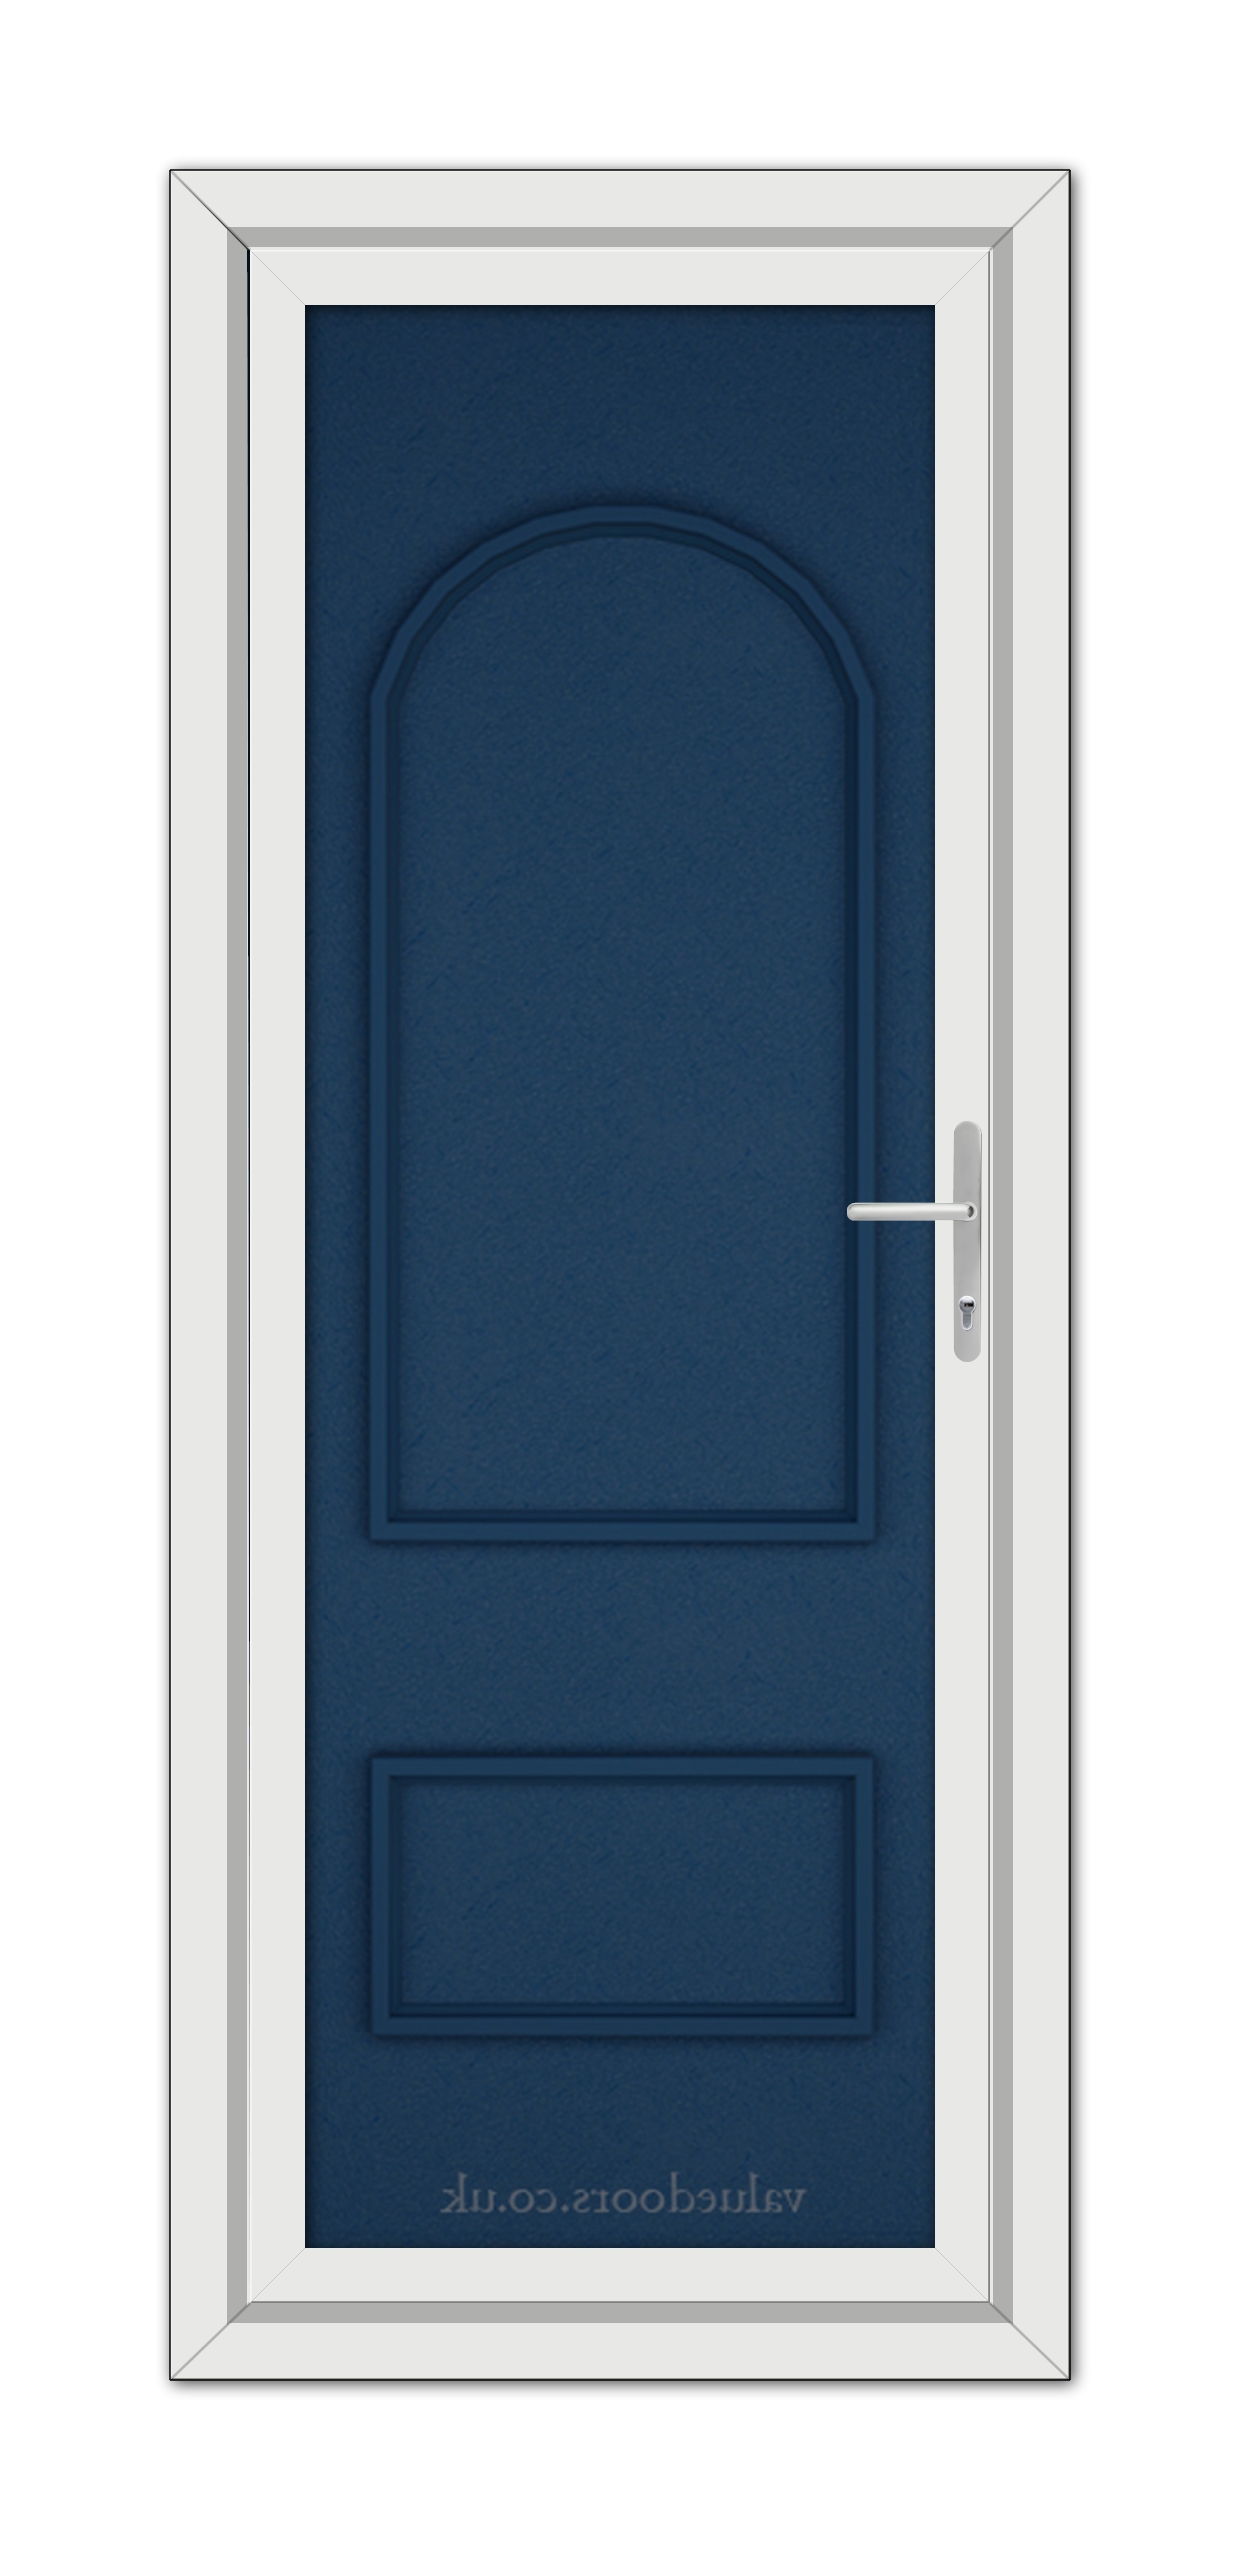 A closed Blue Rockingham Solid uPVC door with an arched top and two panels, set in a white frame, featuring a silver handle on the right side.